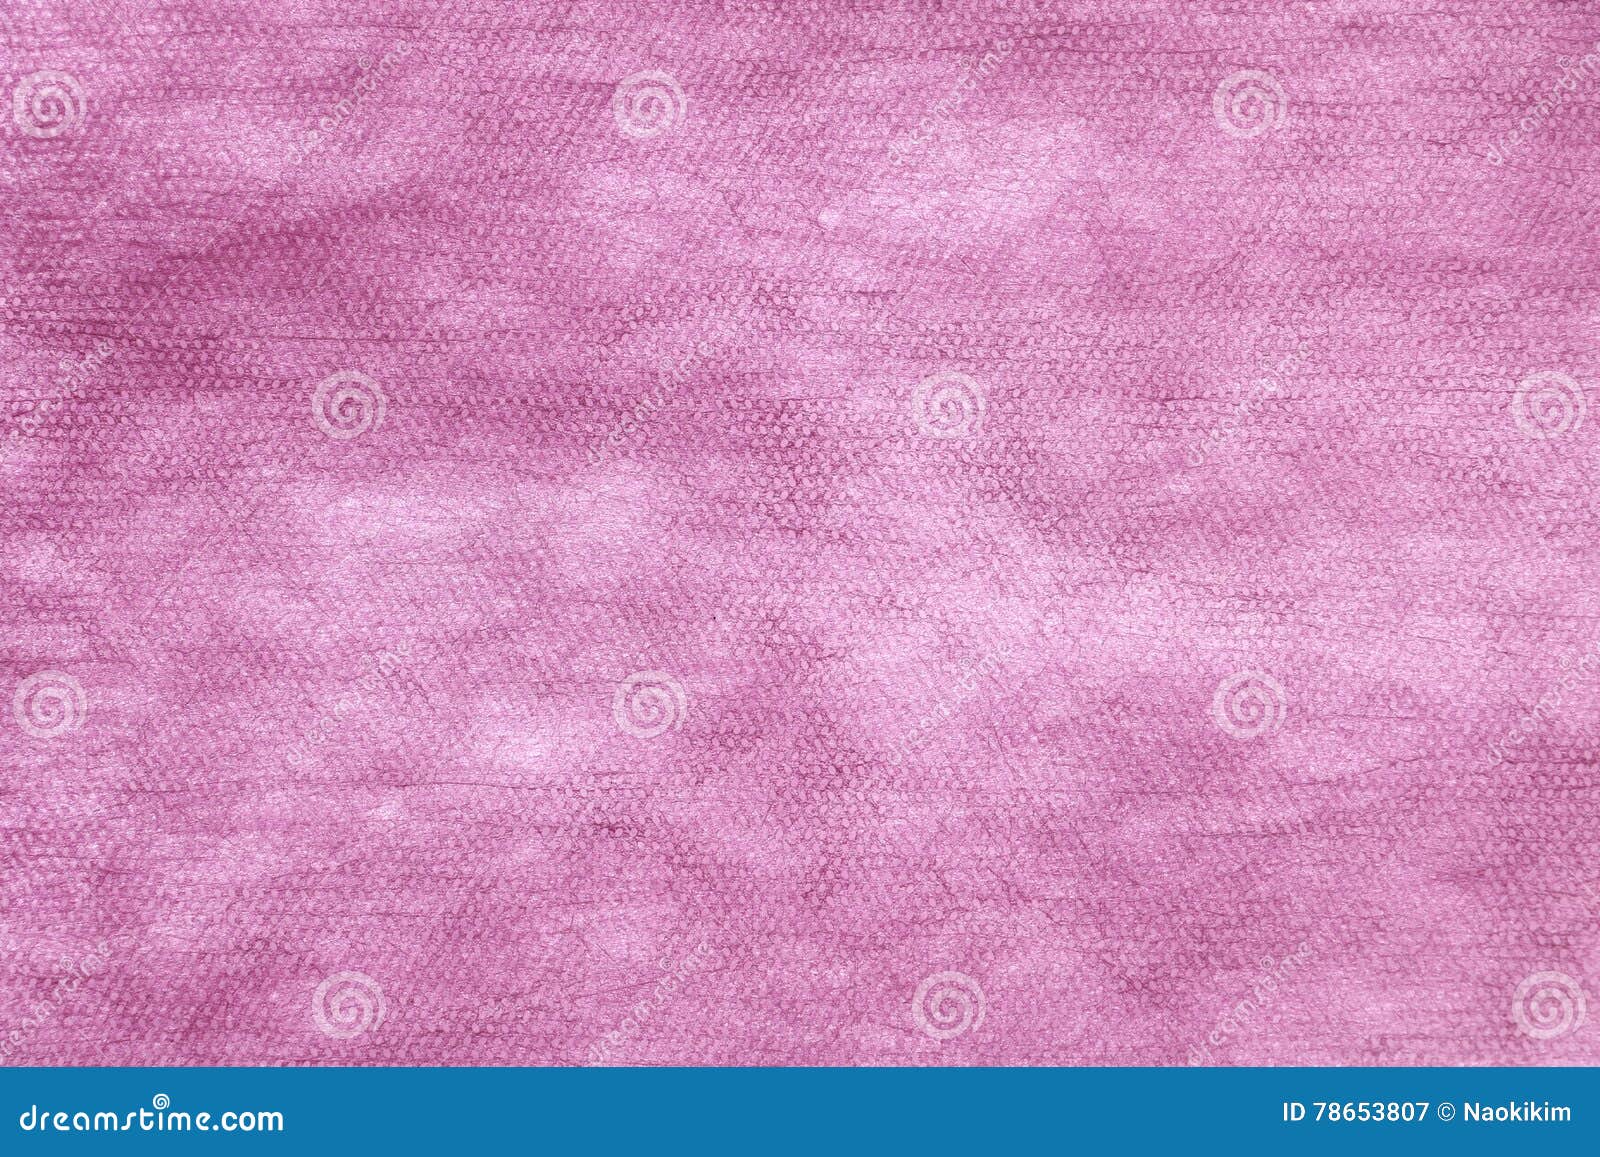 Japanese Traditional Paper Texture Background Stock Image - Image of ...